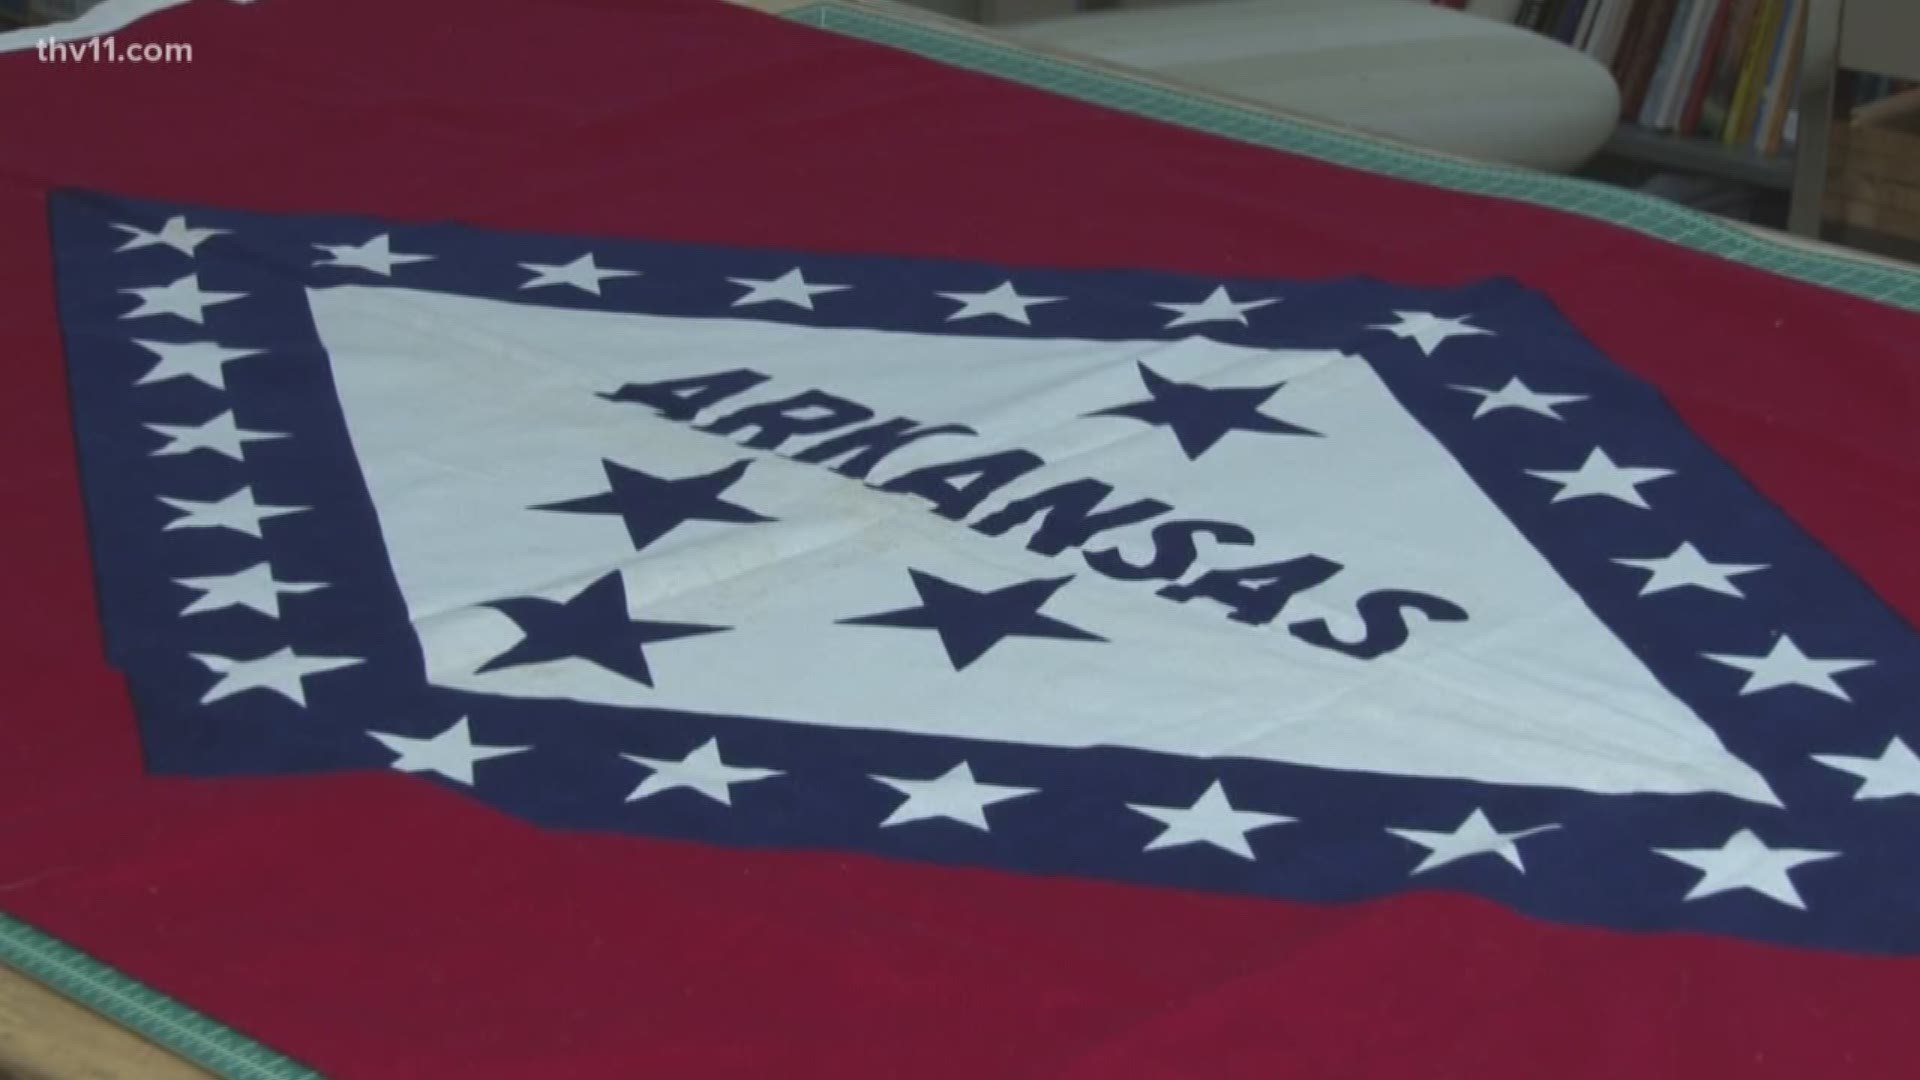 An Arkansas lawmaker is renewing his effort to change the official meaning of the state flag so it no longer commemorate the confederacy.